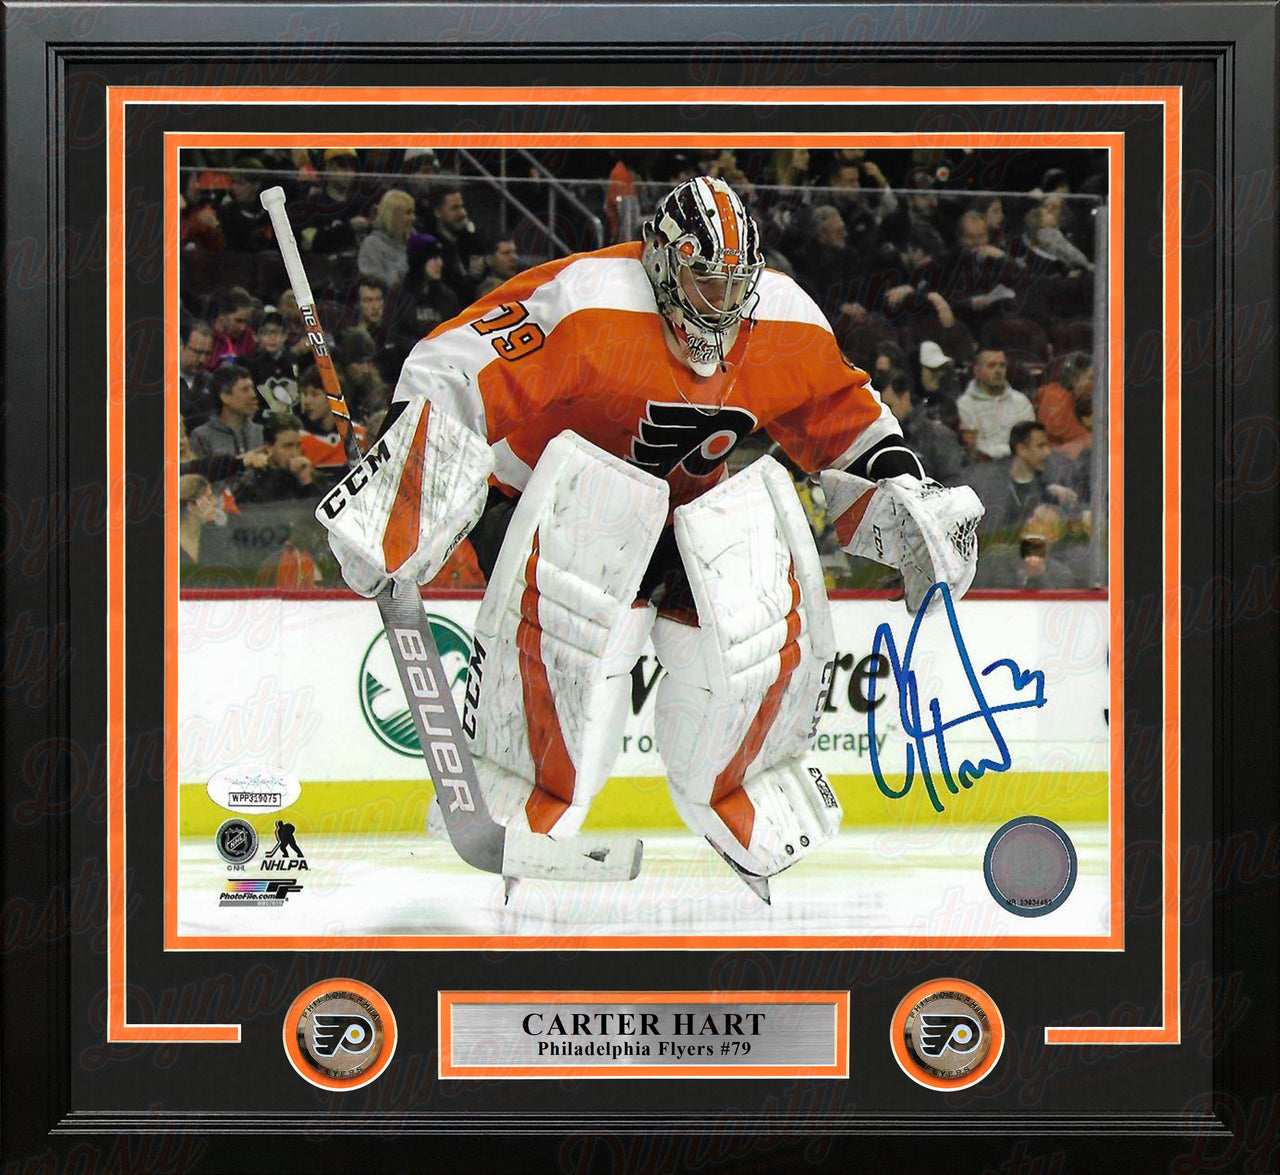 Carter Hart Philadelphia Flyers Jump Autographed NHL Hockey Framed and Matted Photo - Dynasty Sports & Framing 